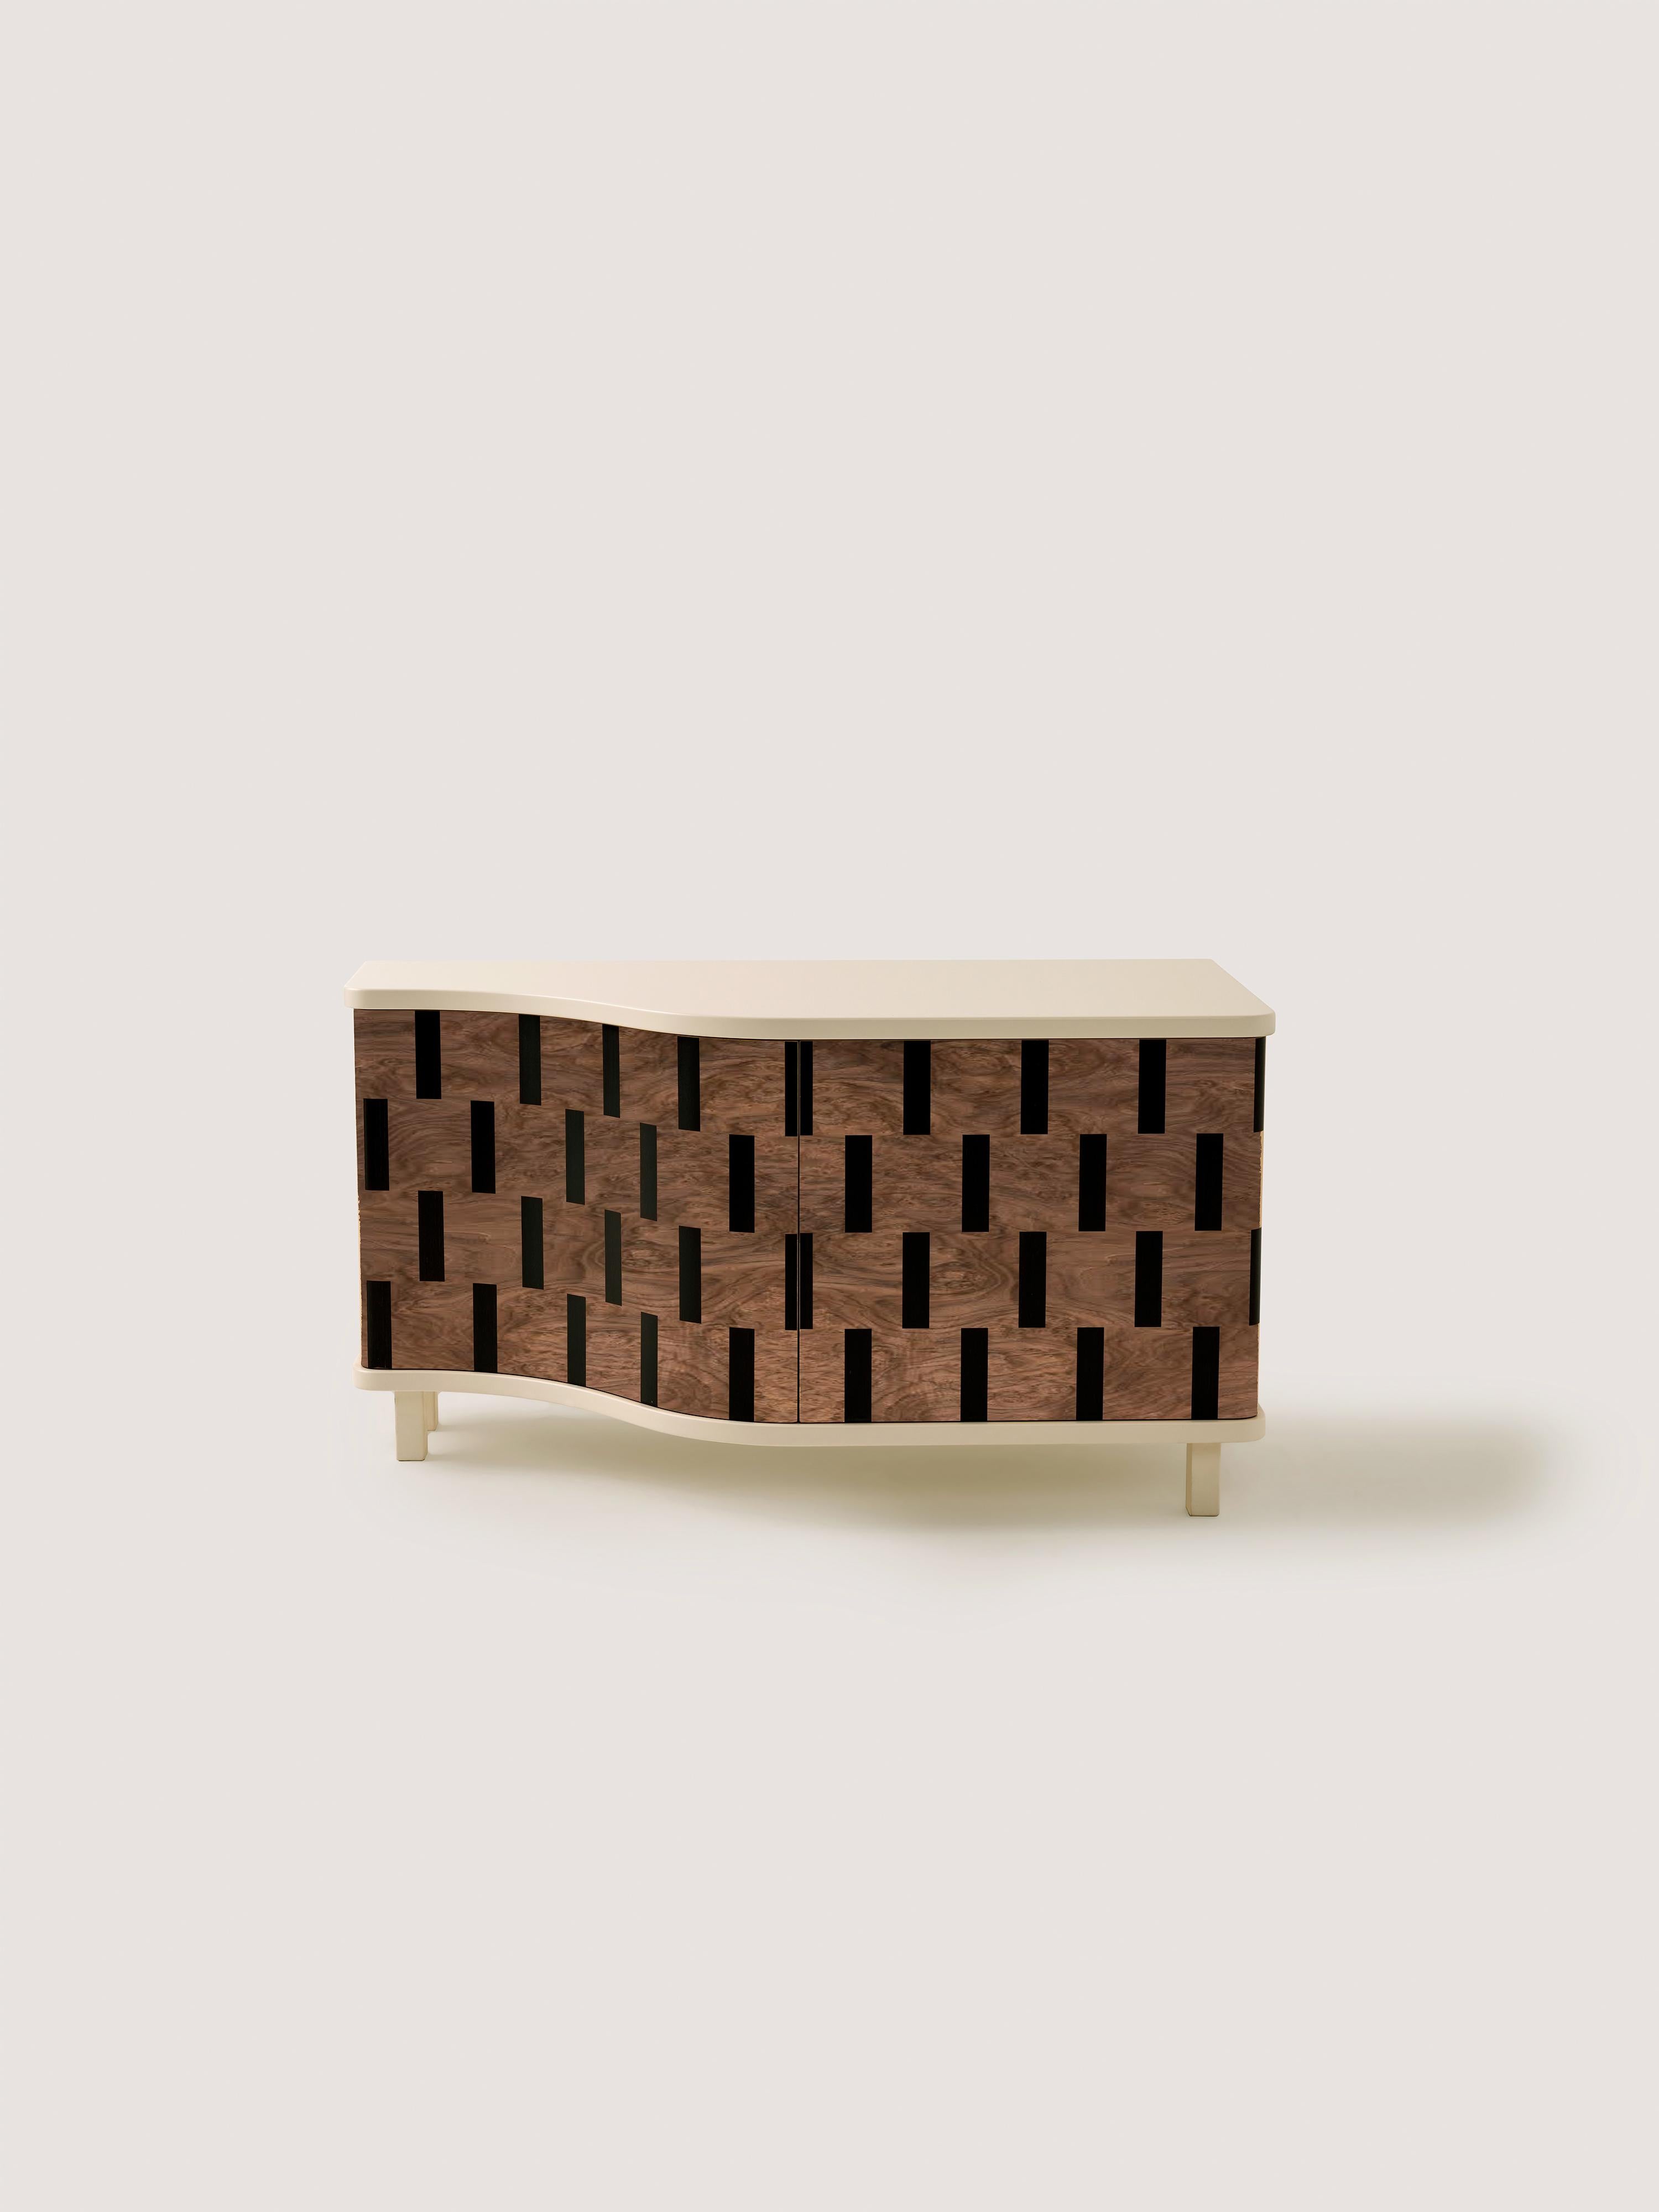 This exclusive credenza is originally designed as a custom shoe cabinet. It is uniquely created by assembling striped geometric wooden veneer pieces together, portraying a 3D illusion.

“Rayas” has been made by using traditional marquetry technique